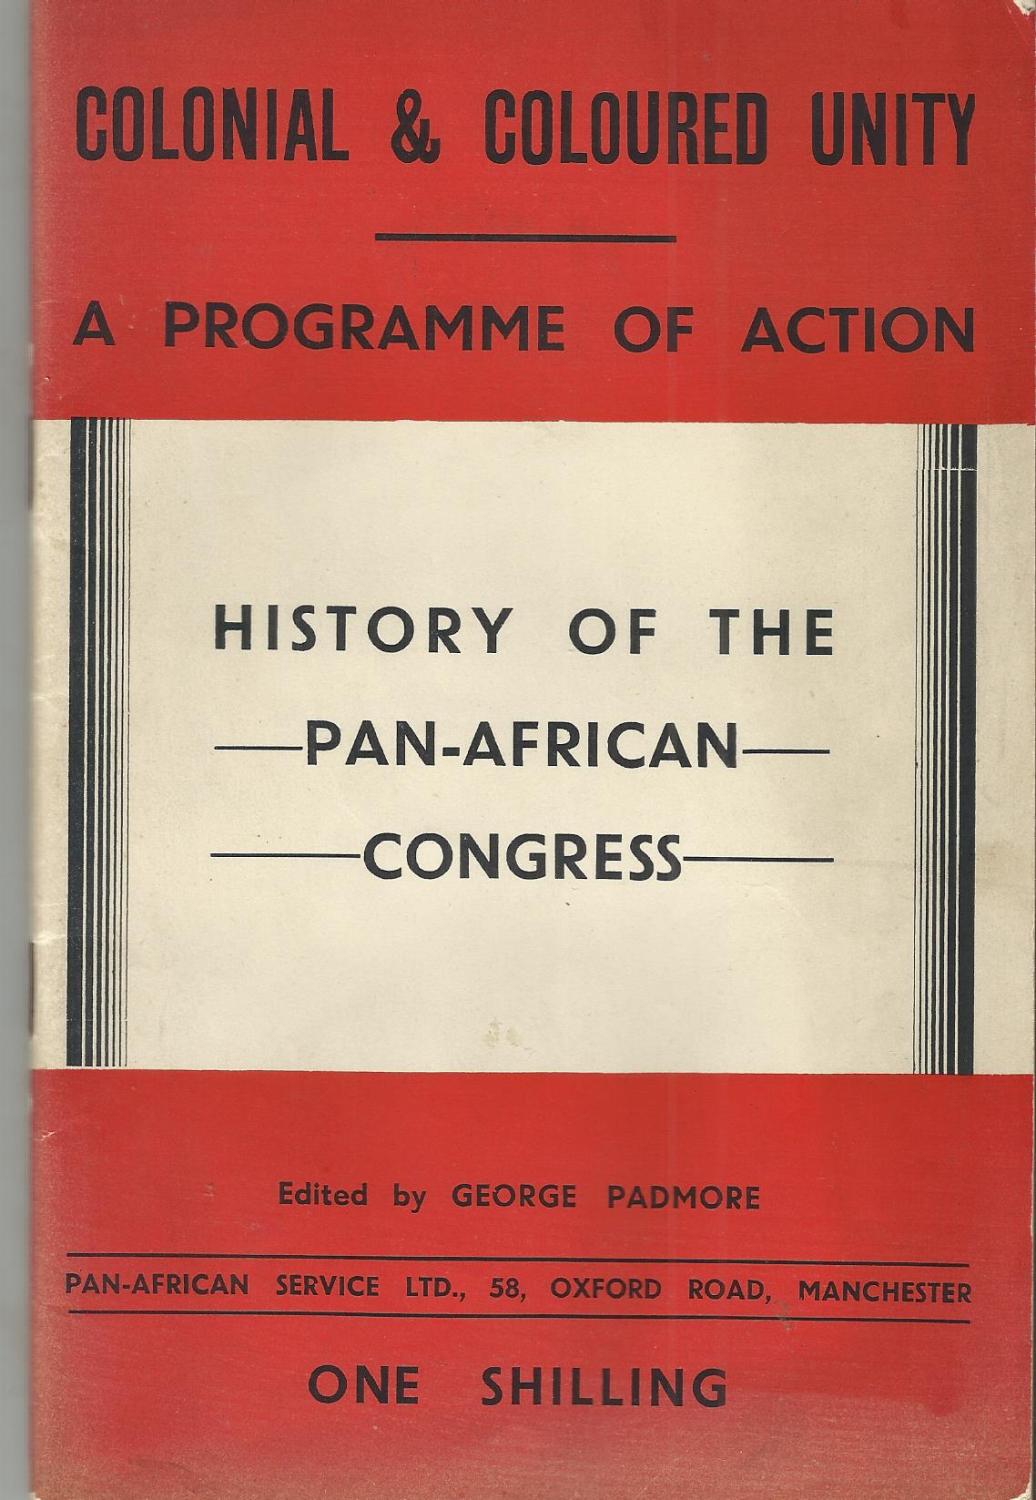 George Padmore, Colonial and Coloured Unity